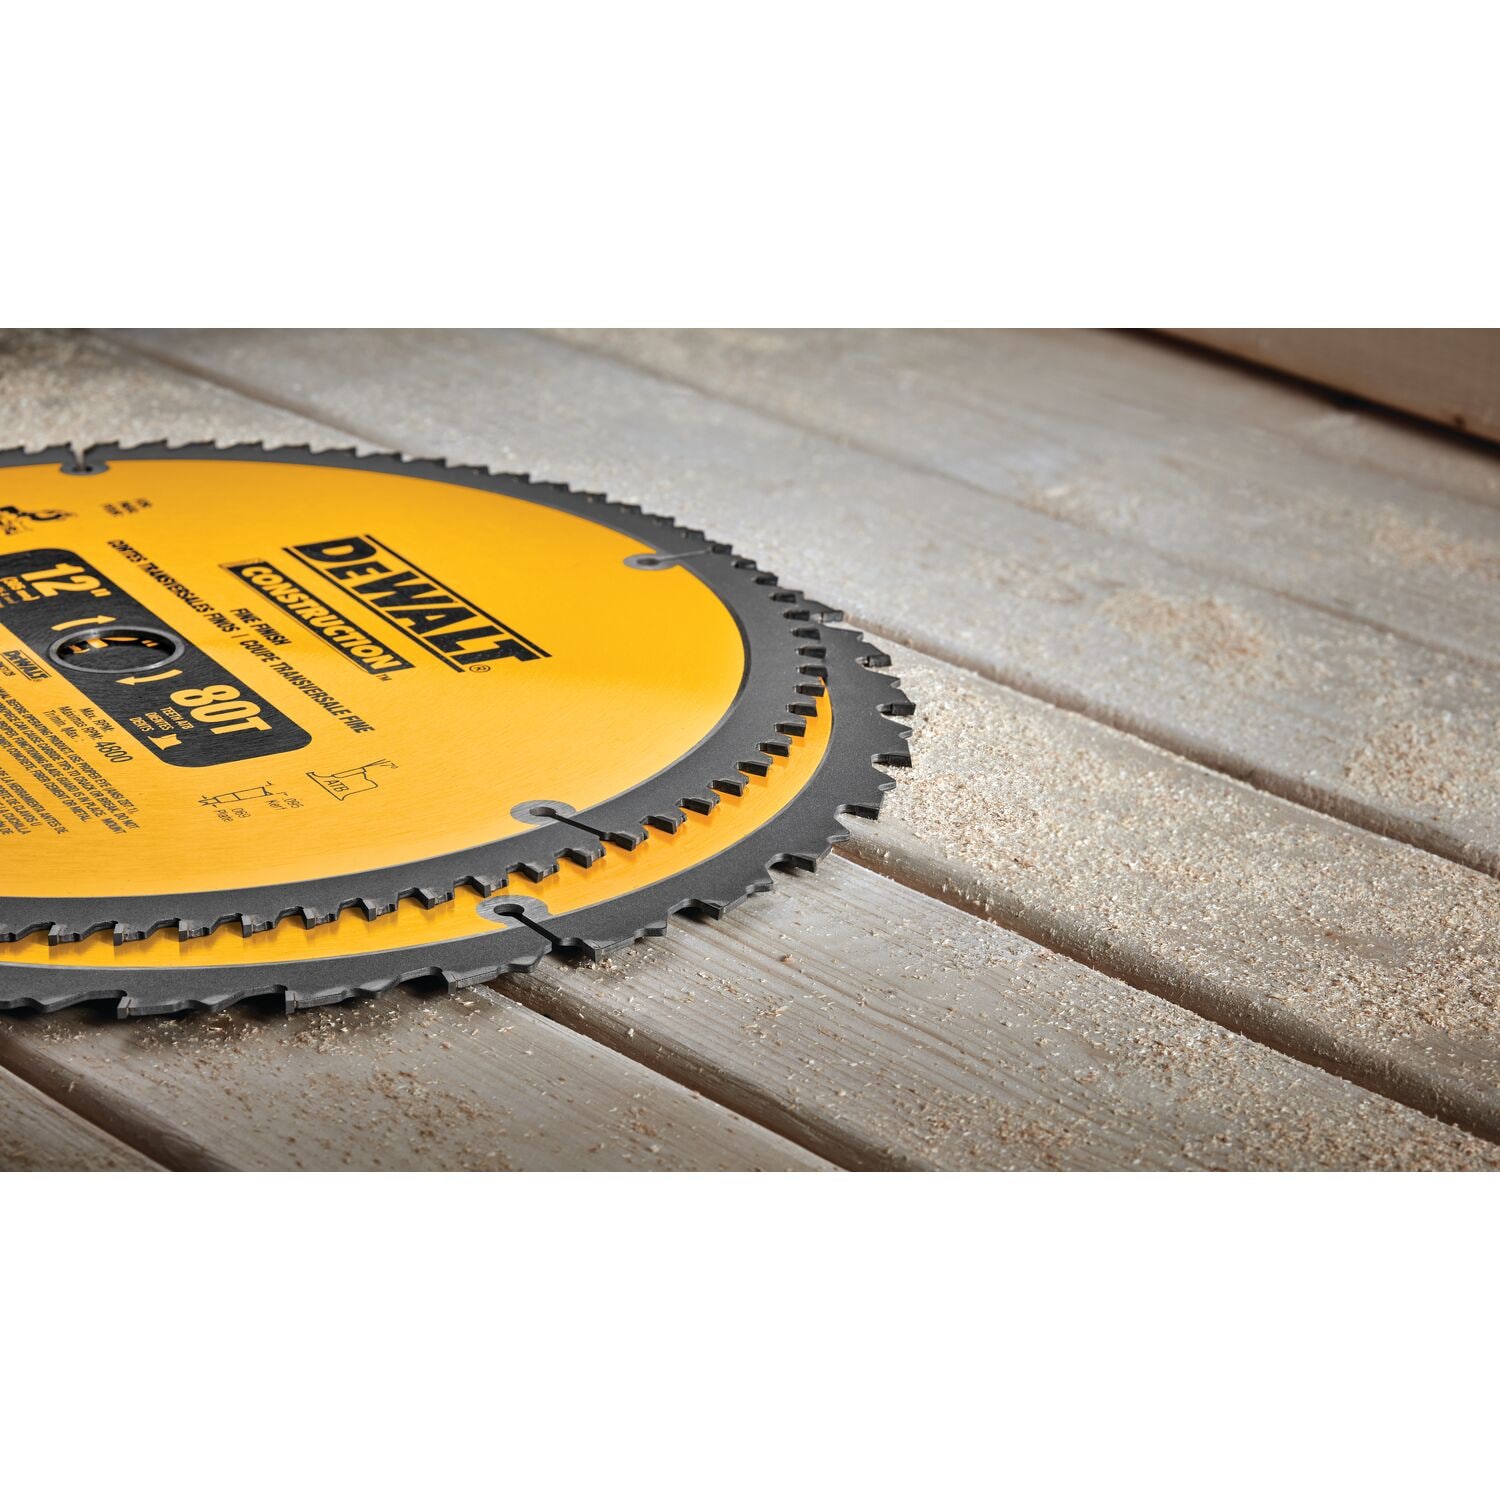 DEWALT 12-in 32 and 80-Tooth Fine Finish Carbide Miter/Table Saw Blade Set  (2-Pack) in the Circular Saw Blades department at